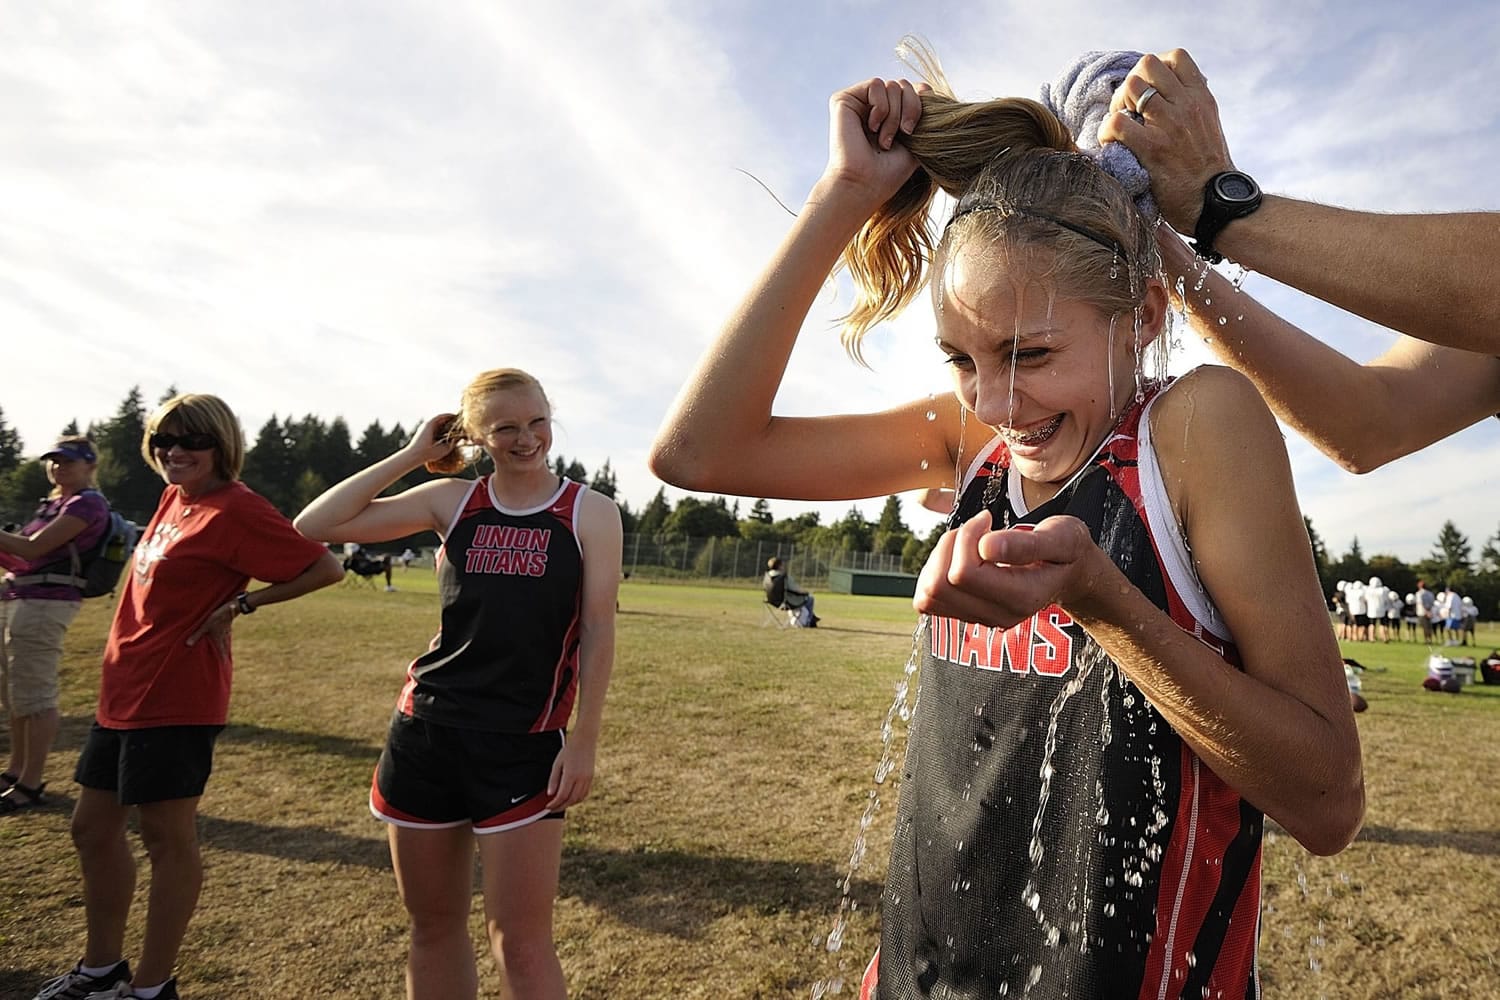 Union freshman Alexis Fuller gets a cold splash of water on her back before running a varsity race at a meet at Skyview High School.